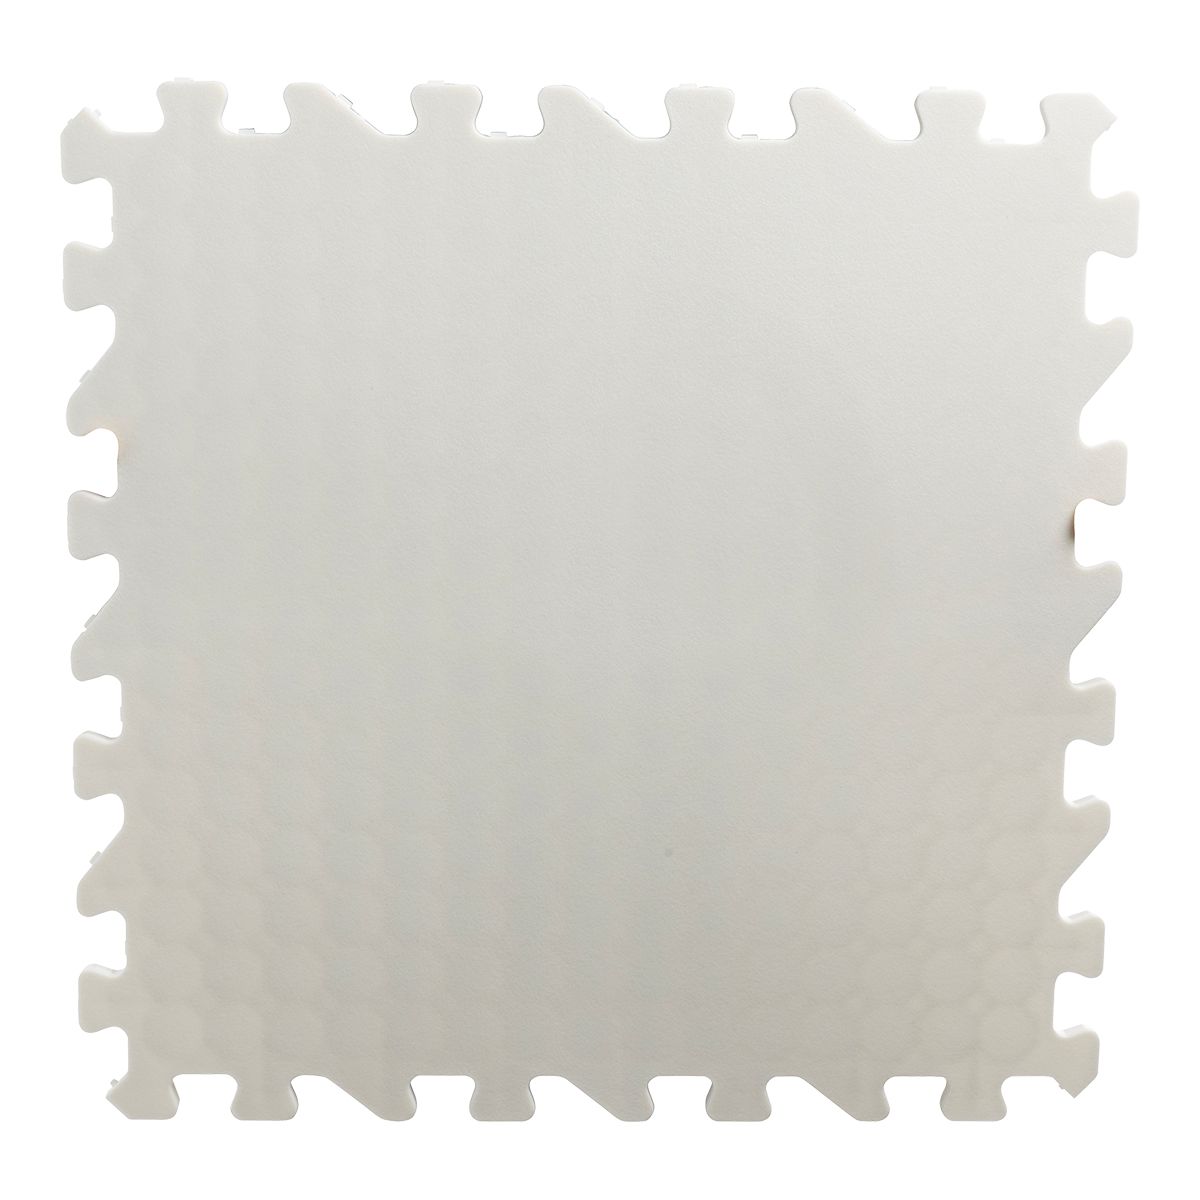 Image of Bauer Synthetic Ice Tiles - 10 Pack